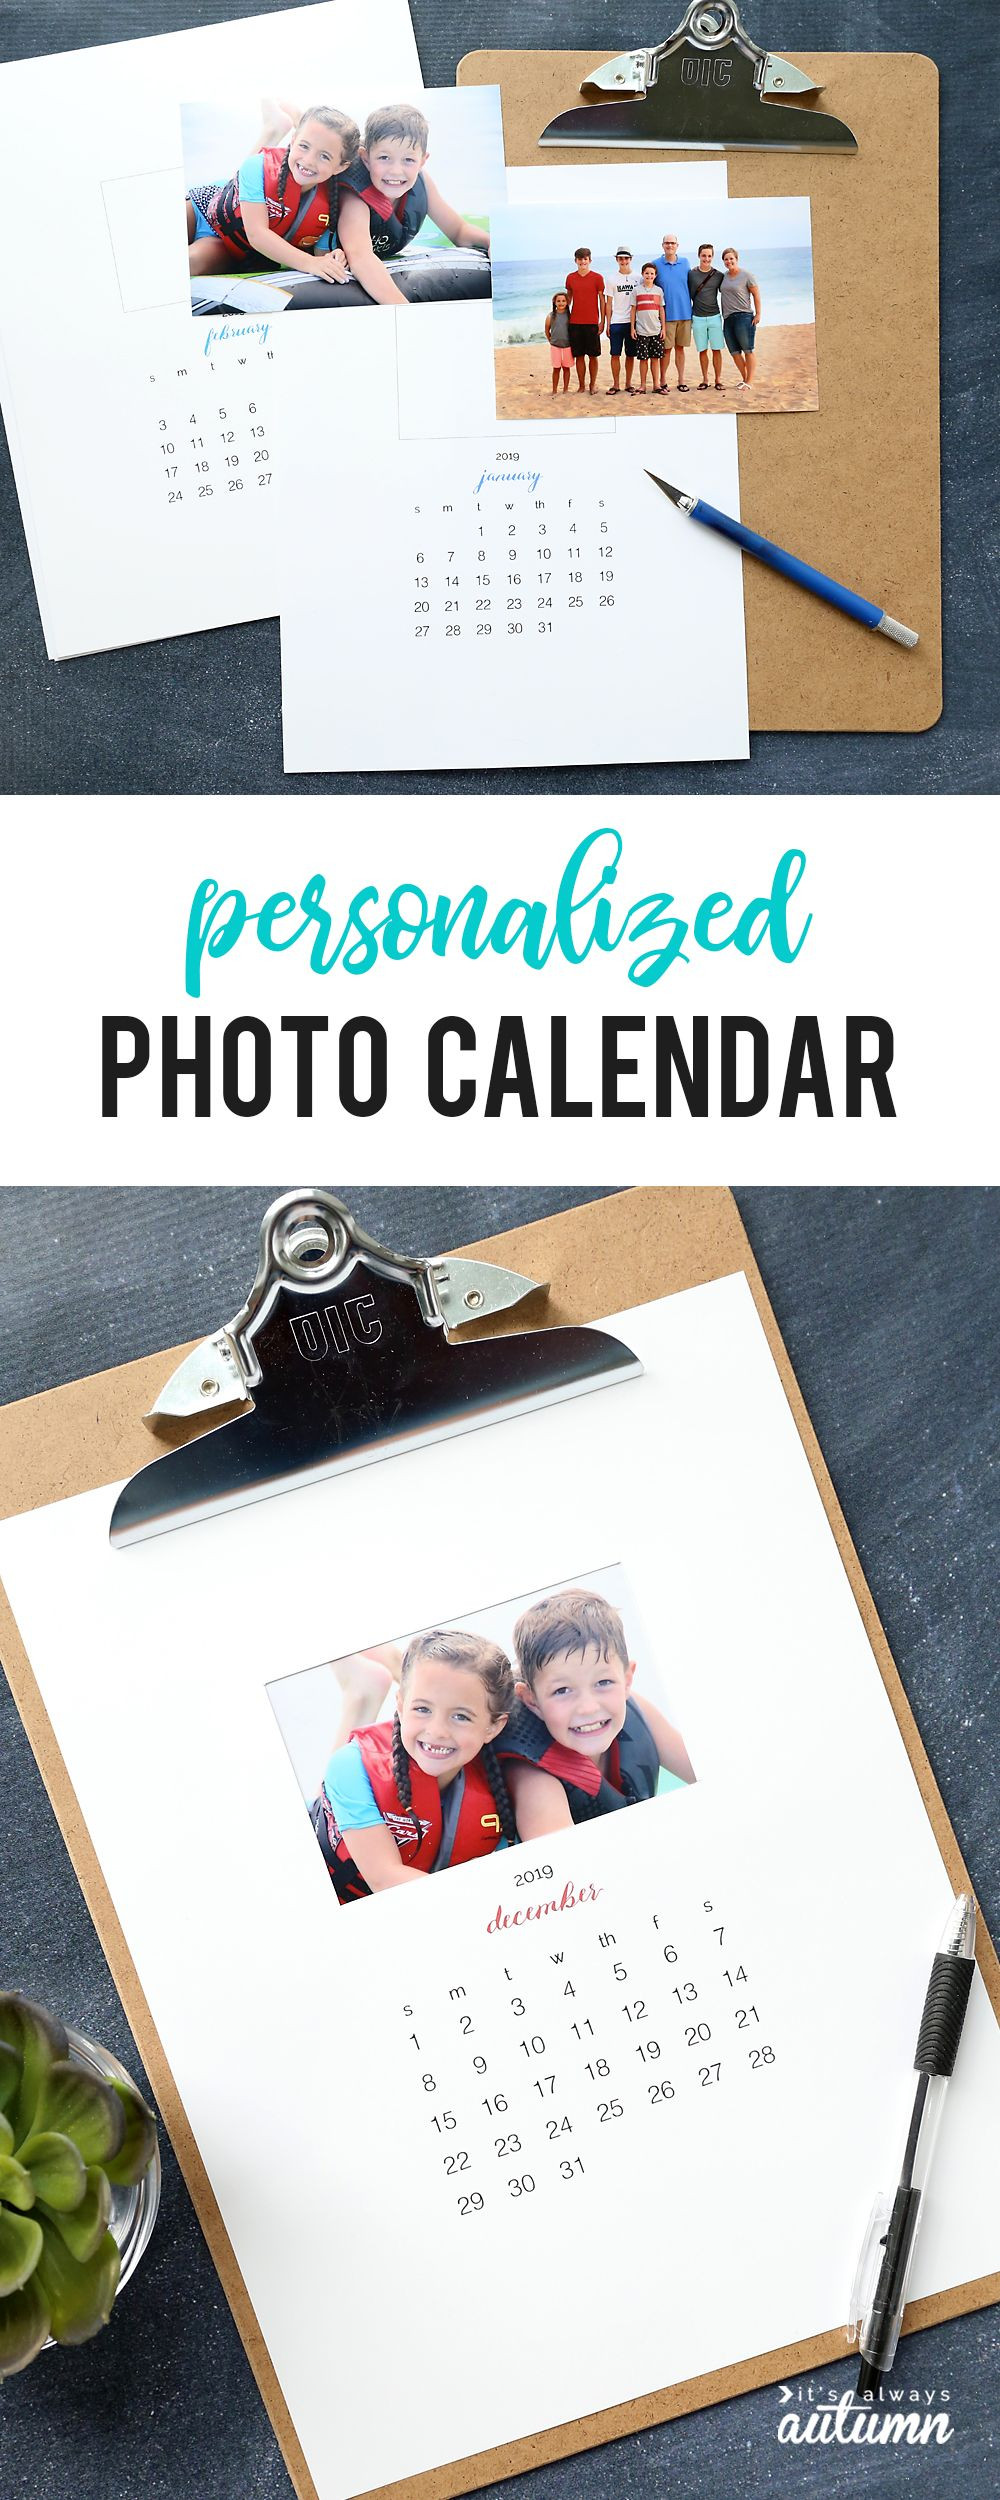 Christmas Gift Ideas For Parents 2020
 Make a personalized 2020 photo calendar free templates